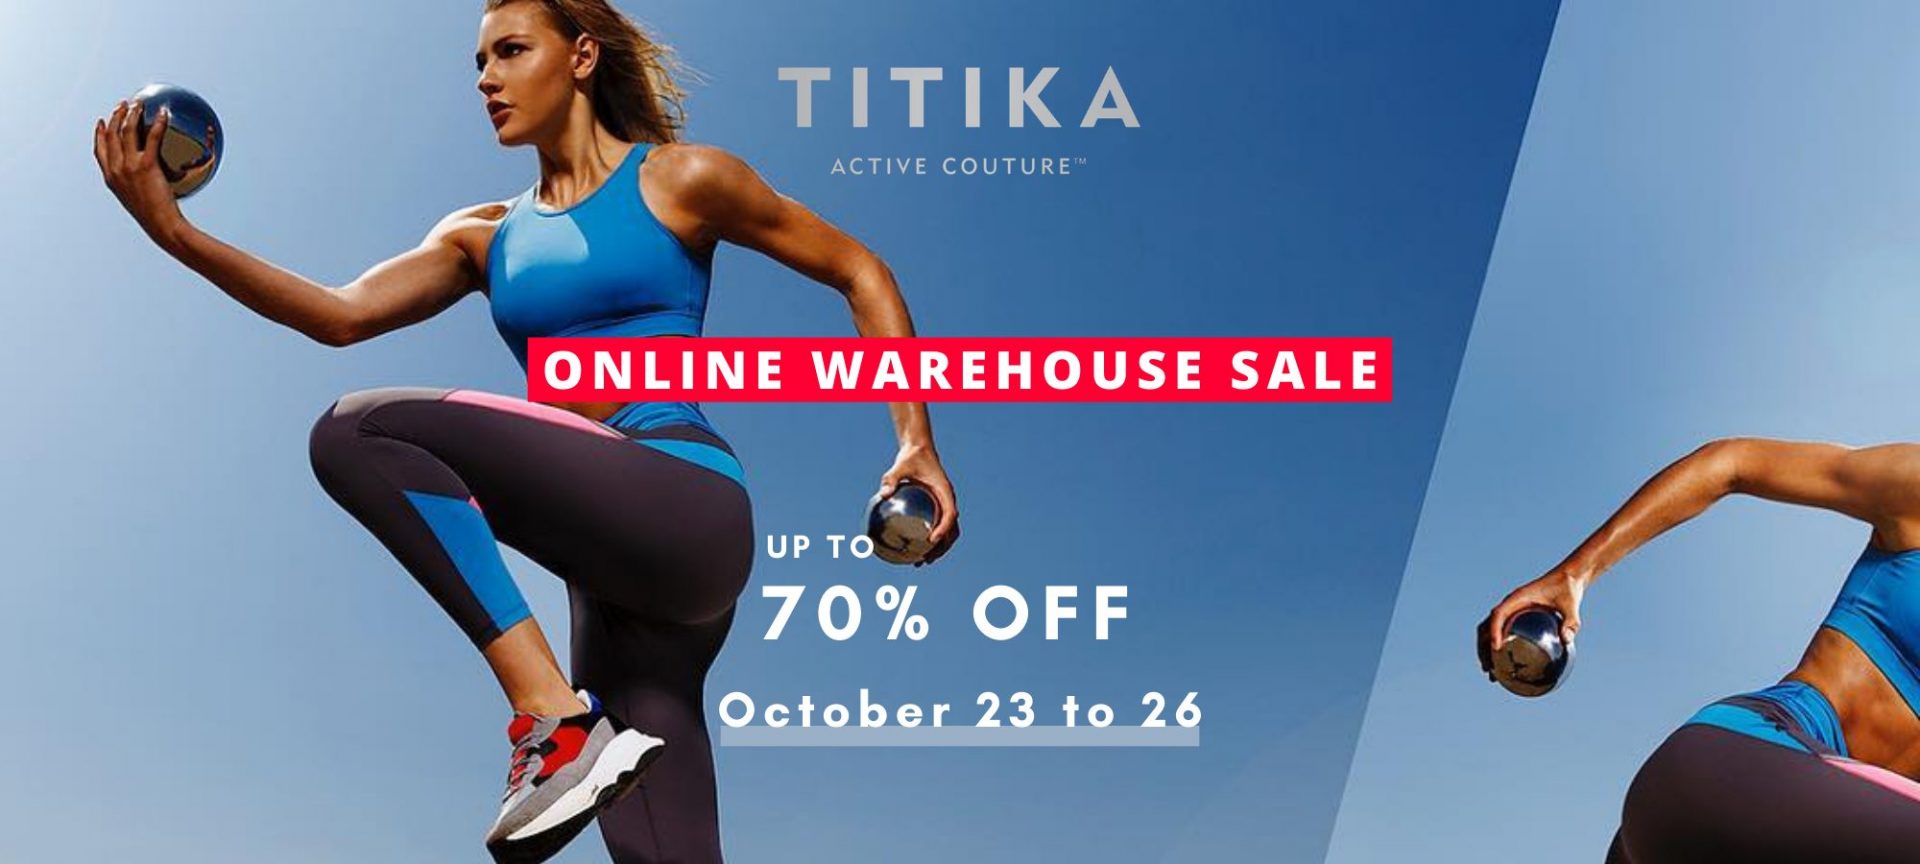 Titika Online Warehouse Sale Powered By StyleDemocracy